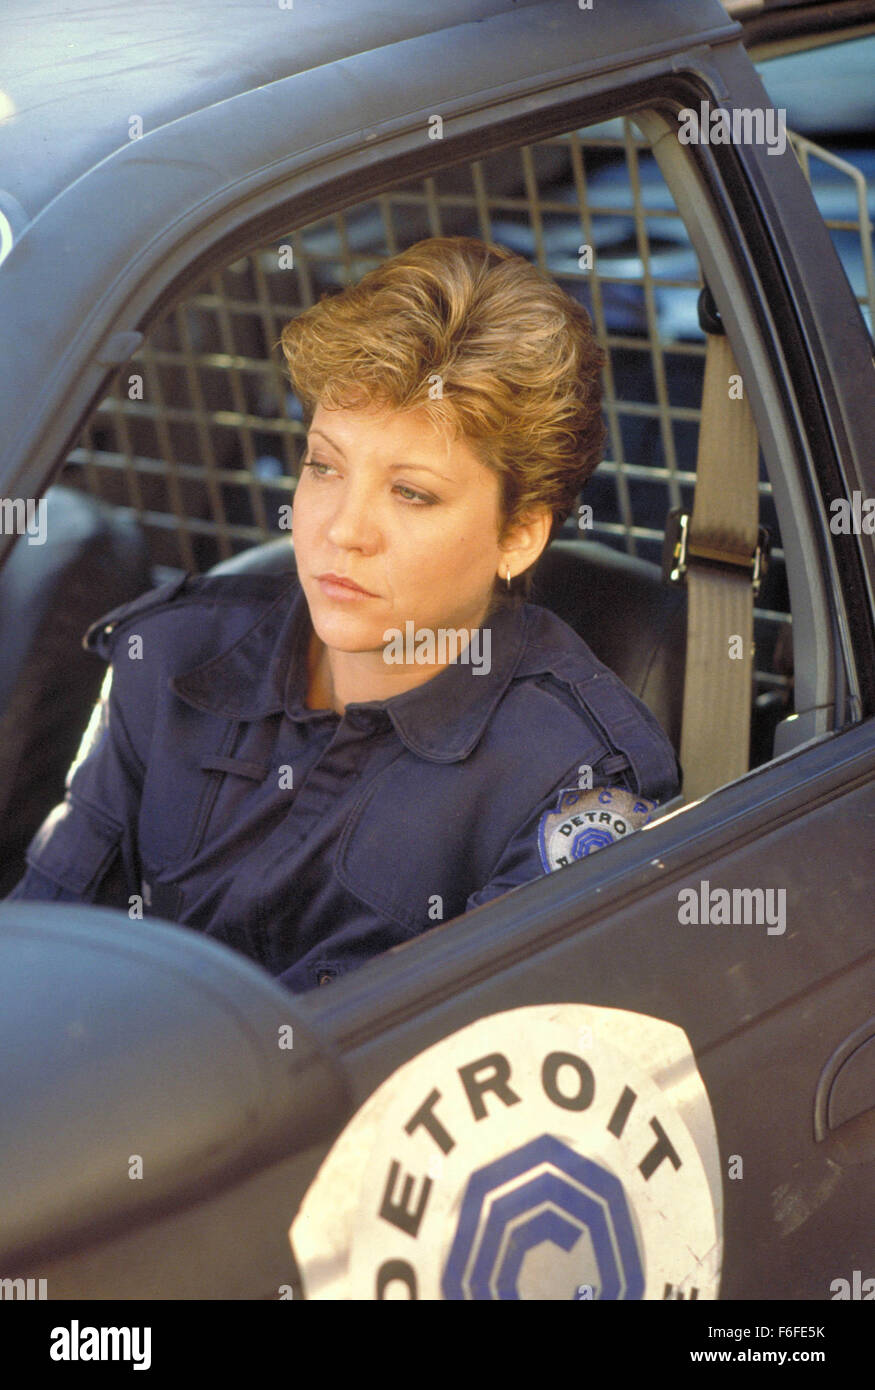 Jul 17, 1987; Dallas, TX, USA; Pictured:  A scene from 'RoboCop,' a 1987 film directed by PAUL VERHOEVEN and starring PETER WELLER as RoboCop and NANCY ALLEN as Officer Anne Lewis. Stock Photo